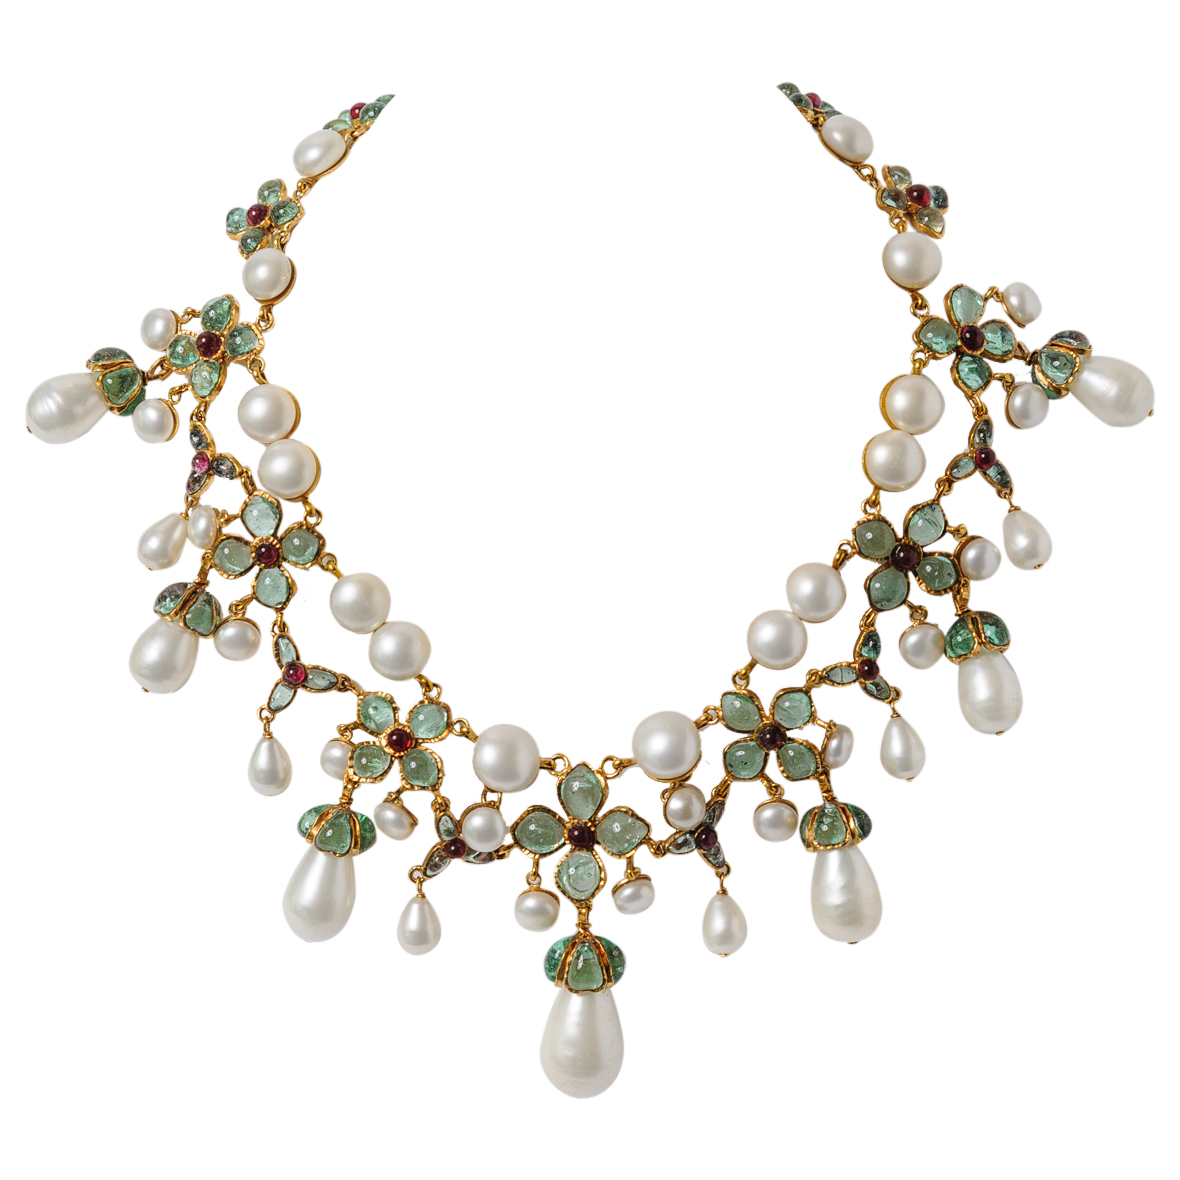 Chanel Necklace 1995 by Gripoix : On Antique Row - West Palm Beach ...